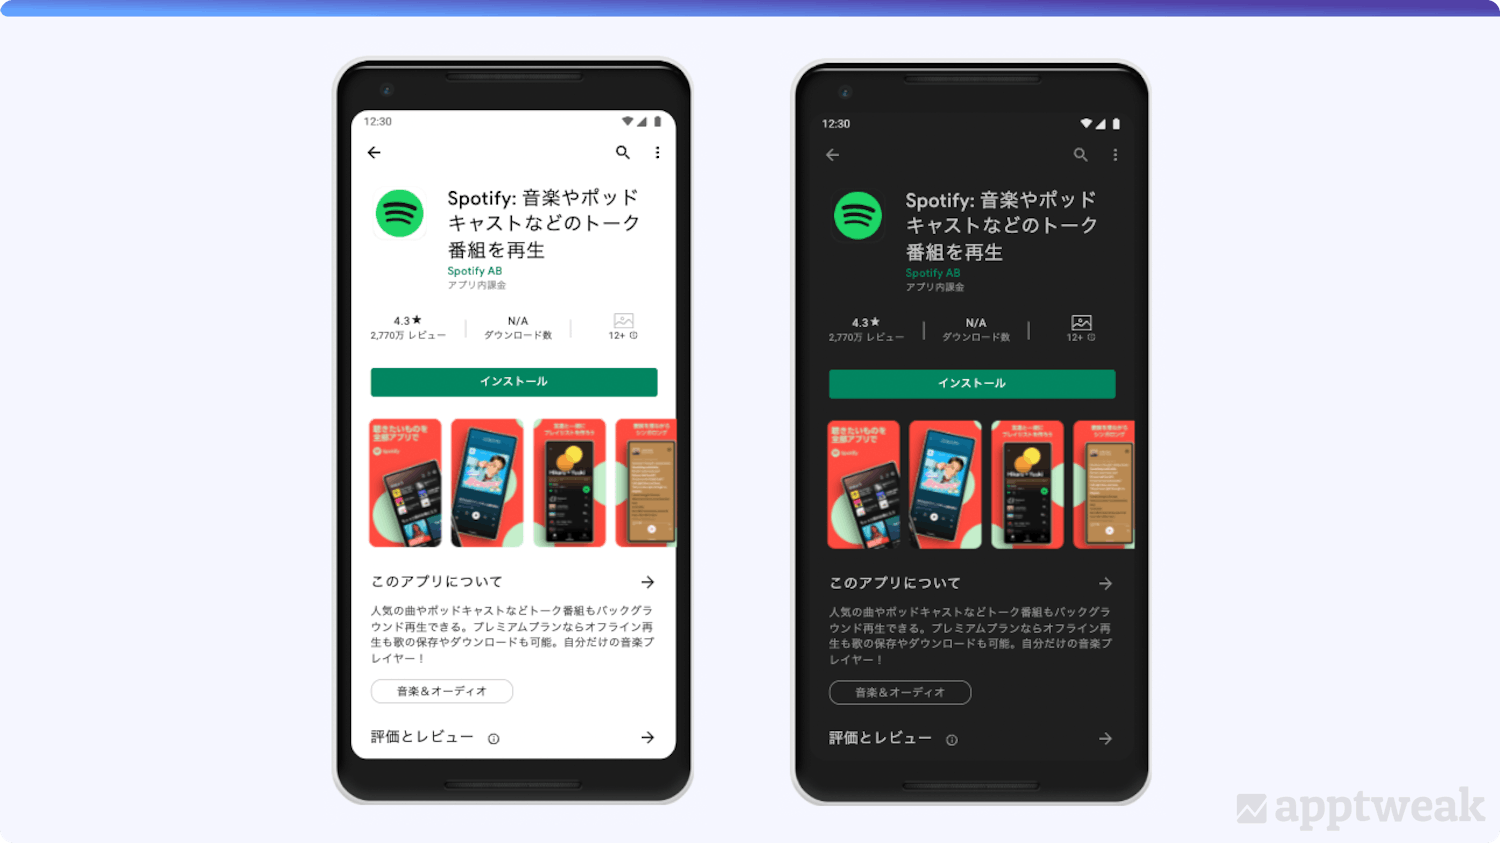 Comparing the Spotify icon on Android in light vs. dark mode with AppTweak’s Store Listing Preview